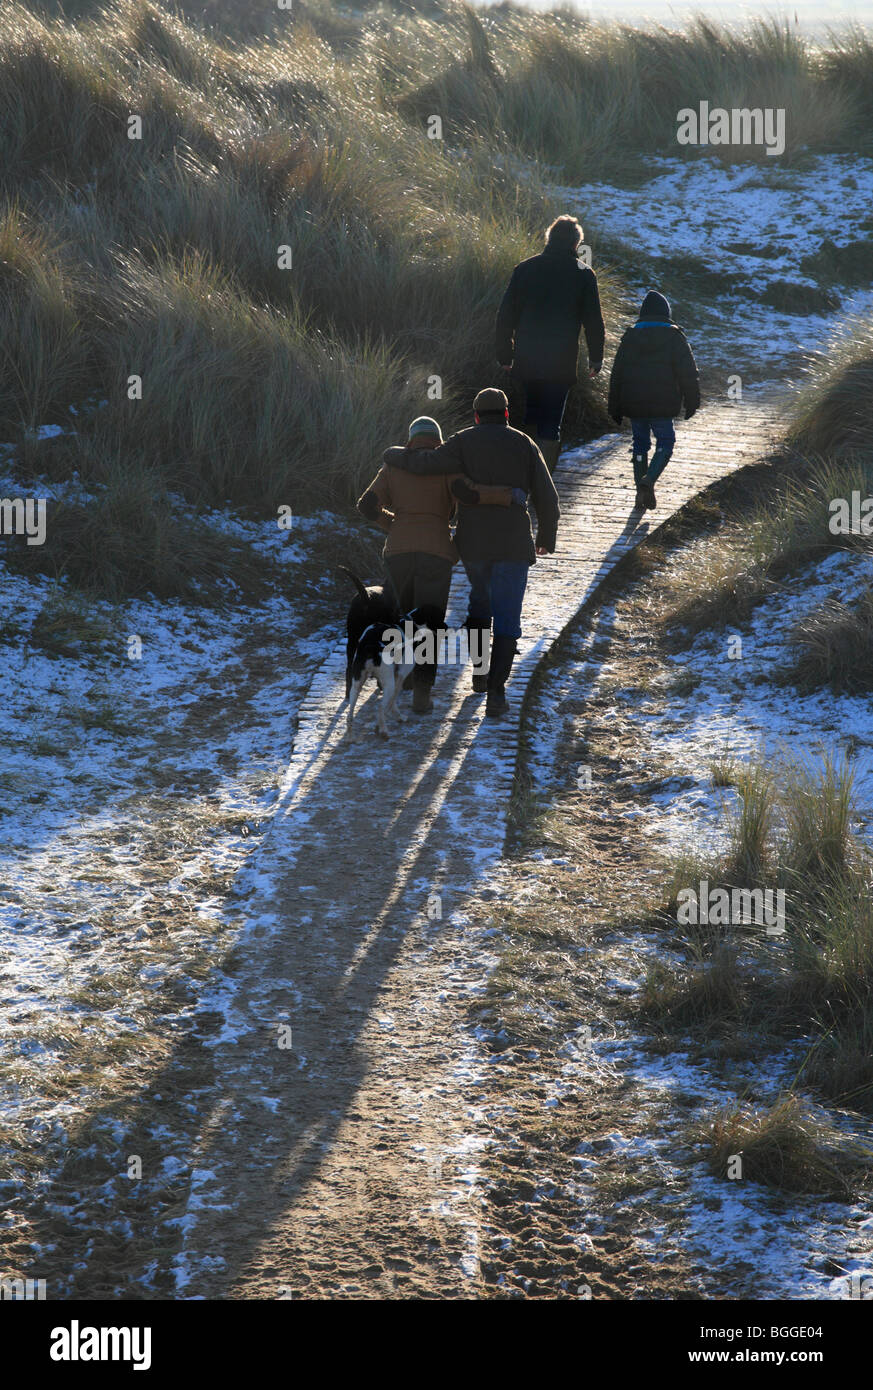 Four people and two dogs walking on a wooden boardwalk through snowy, frosty dunes on New Year's Day 2010 at Burnham Overy. Stock Photo